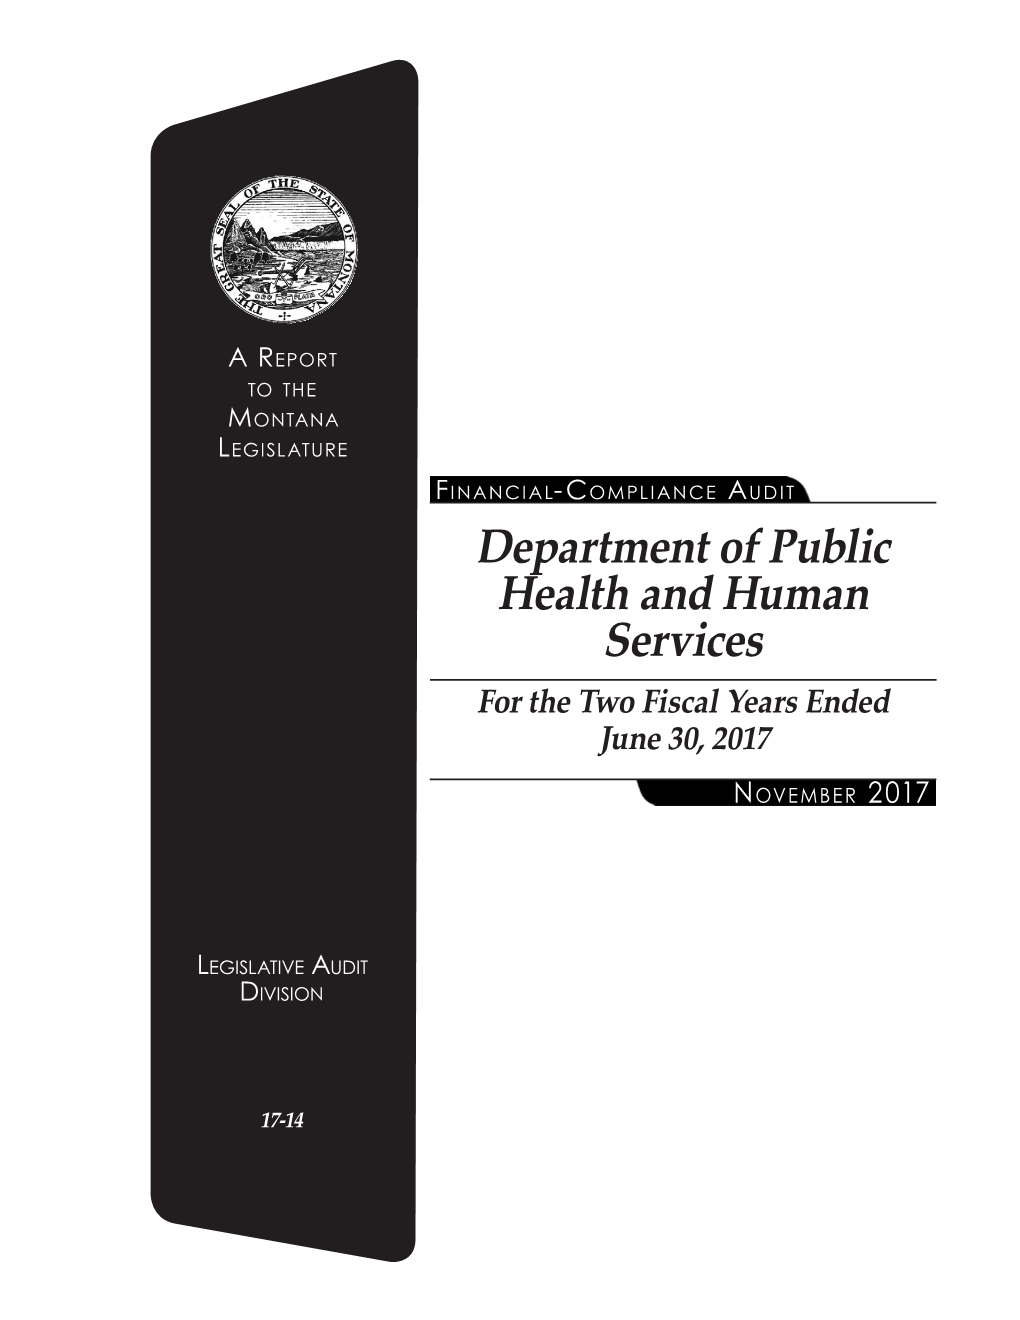 Department of Public Health and Human Services for the Two Fiscal Years Ended June 30, 2017